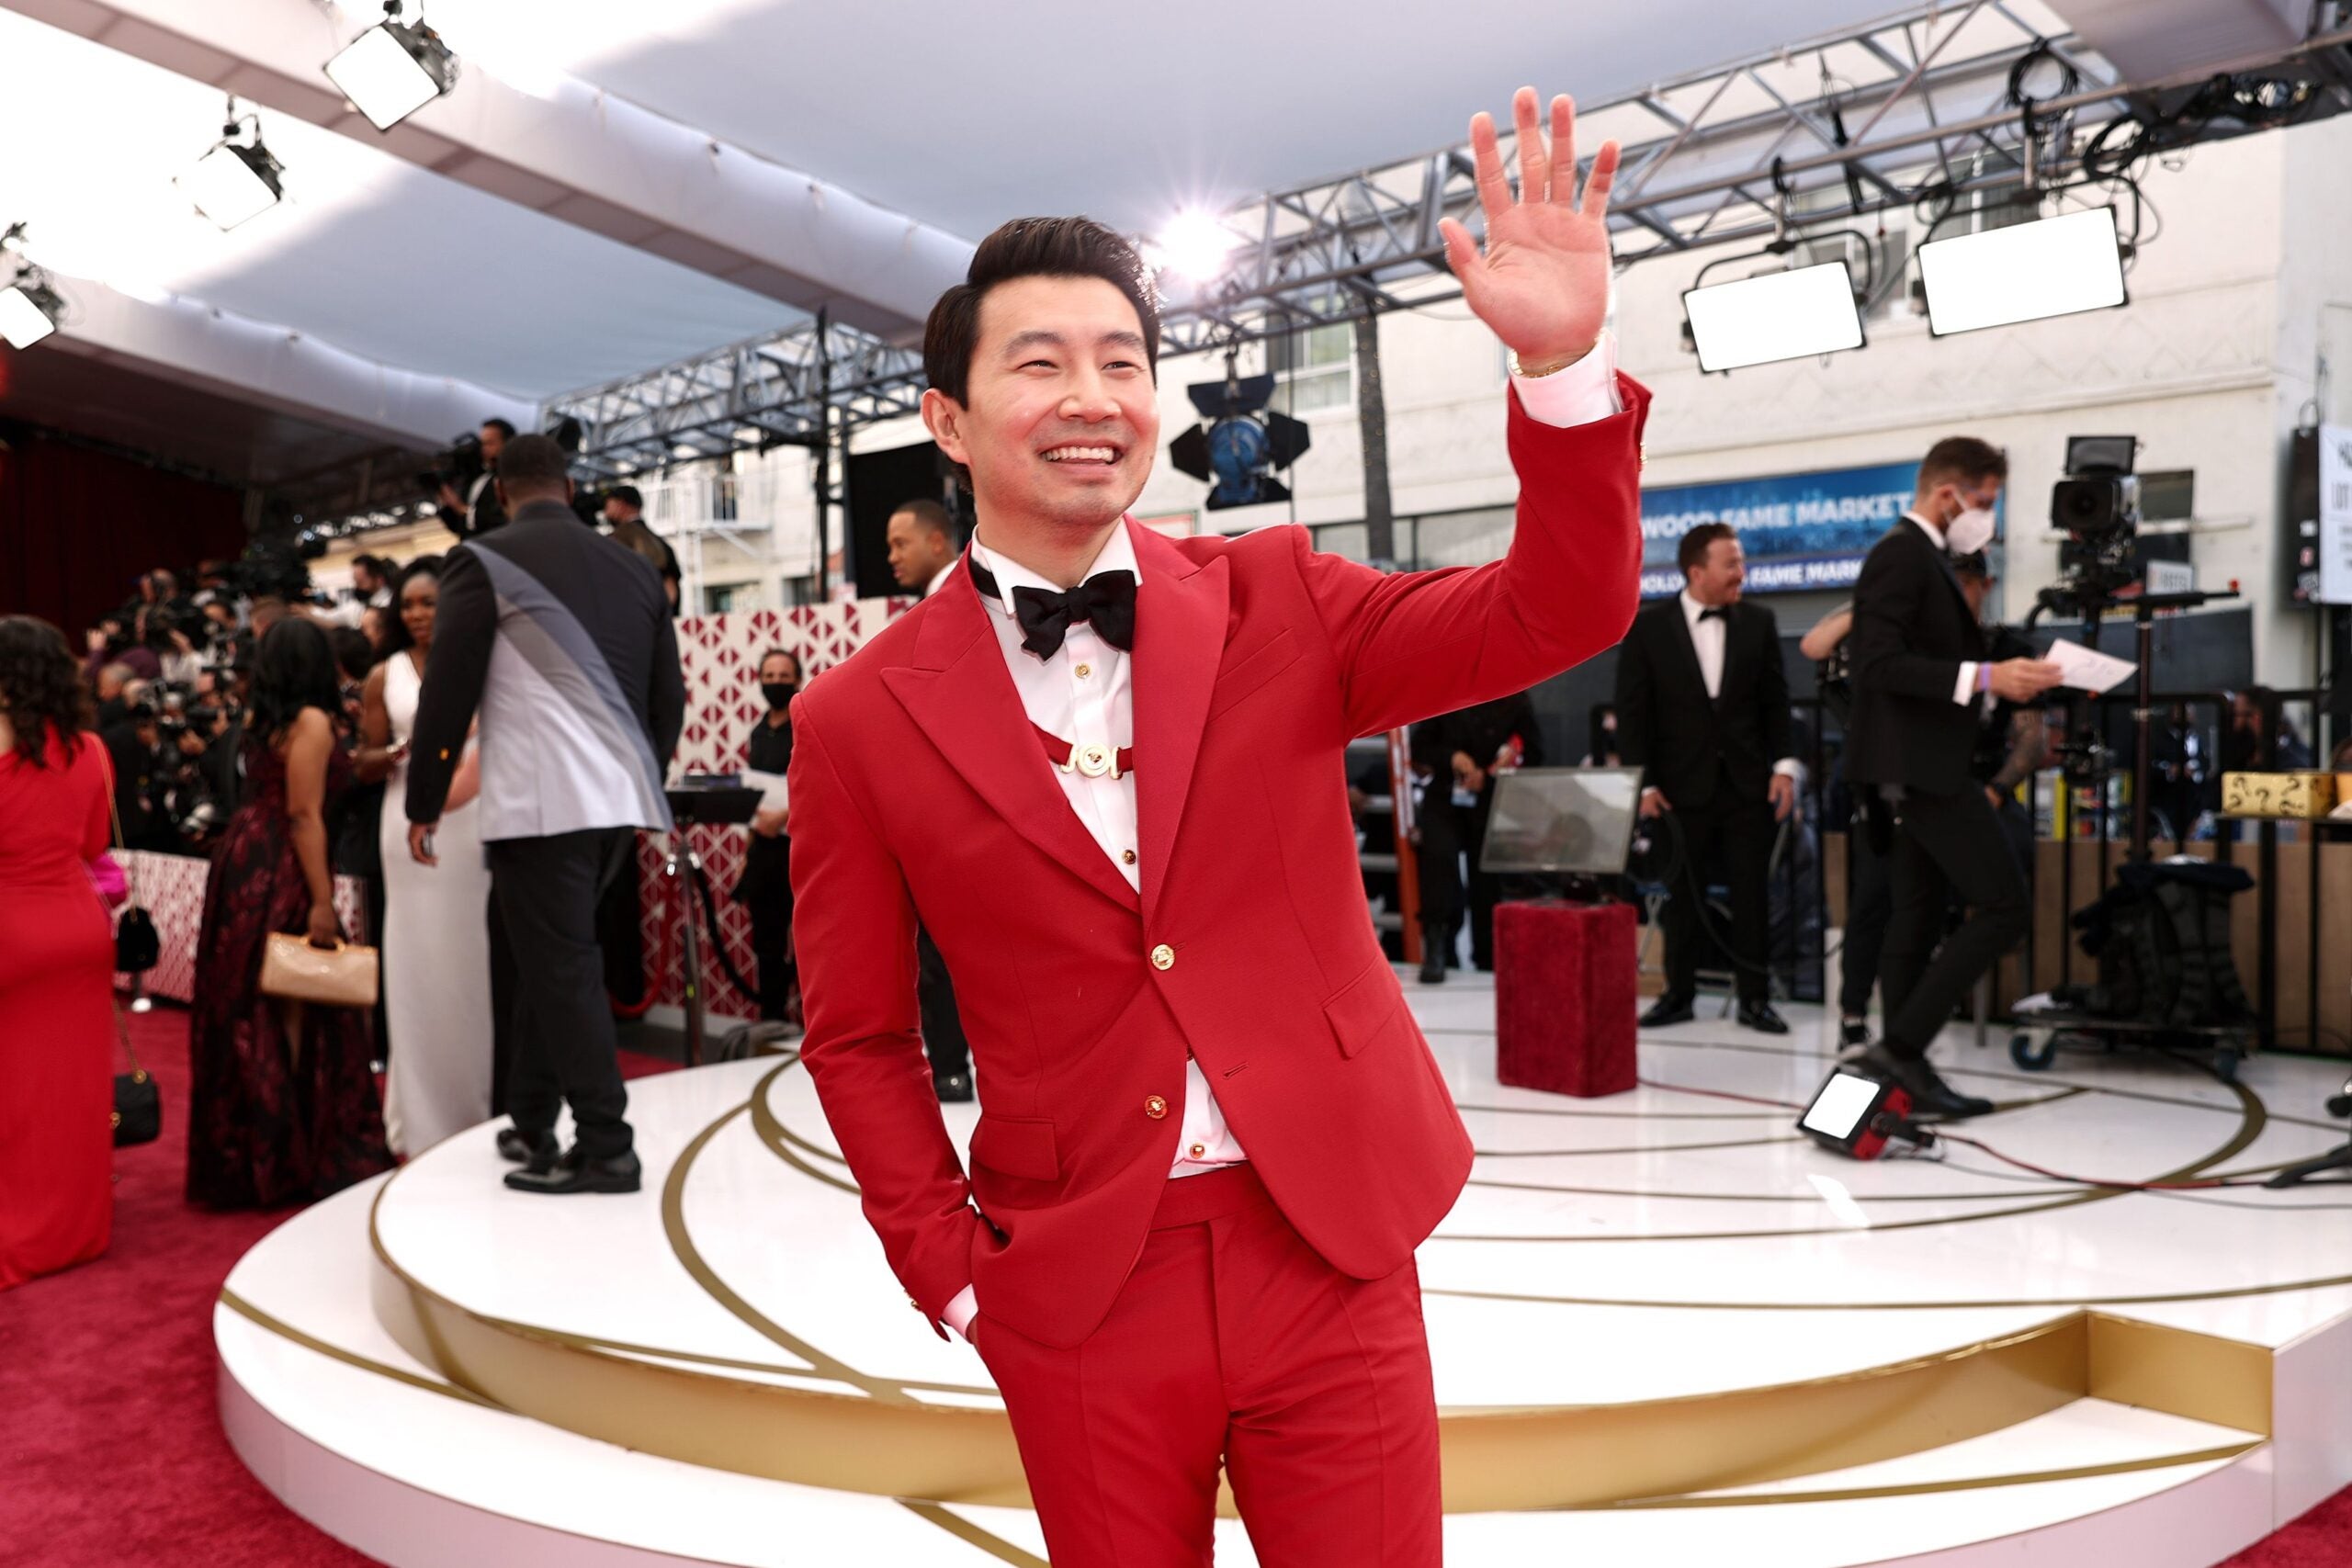 Photos: Scenes from the red carpet at the 2022 Oscars